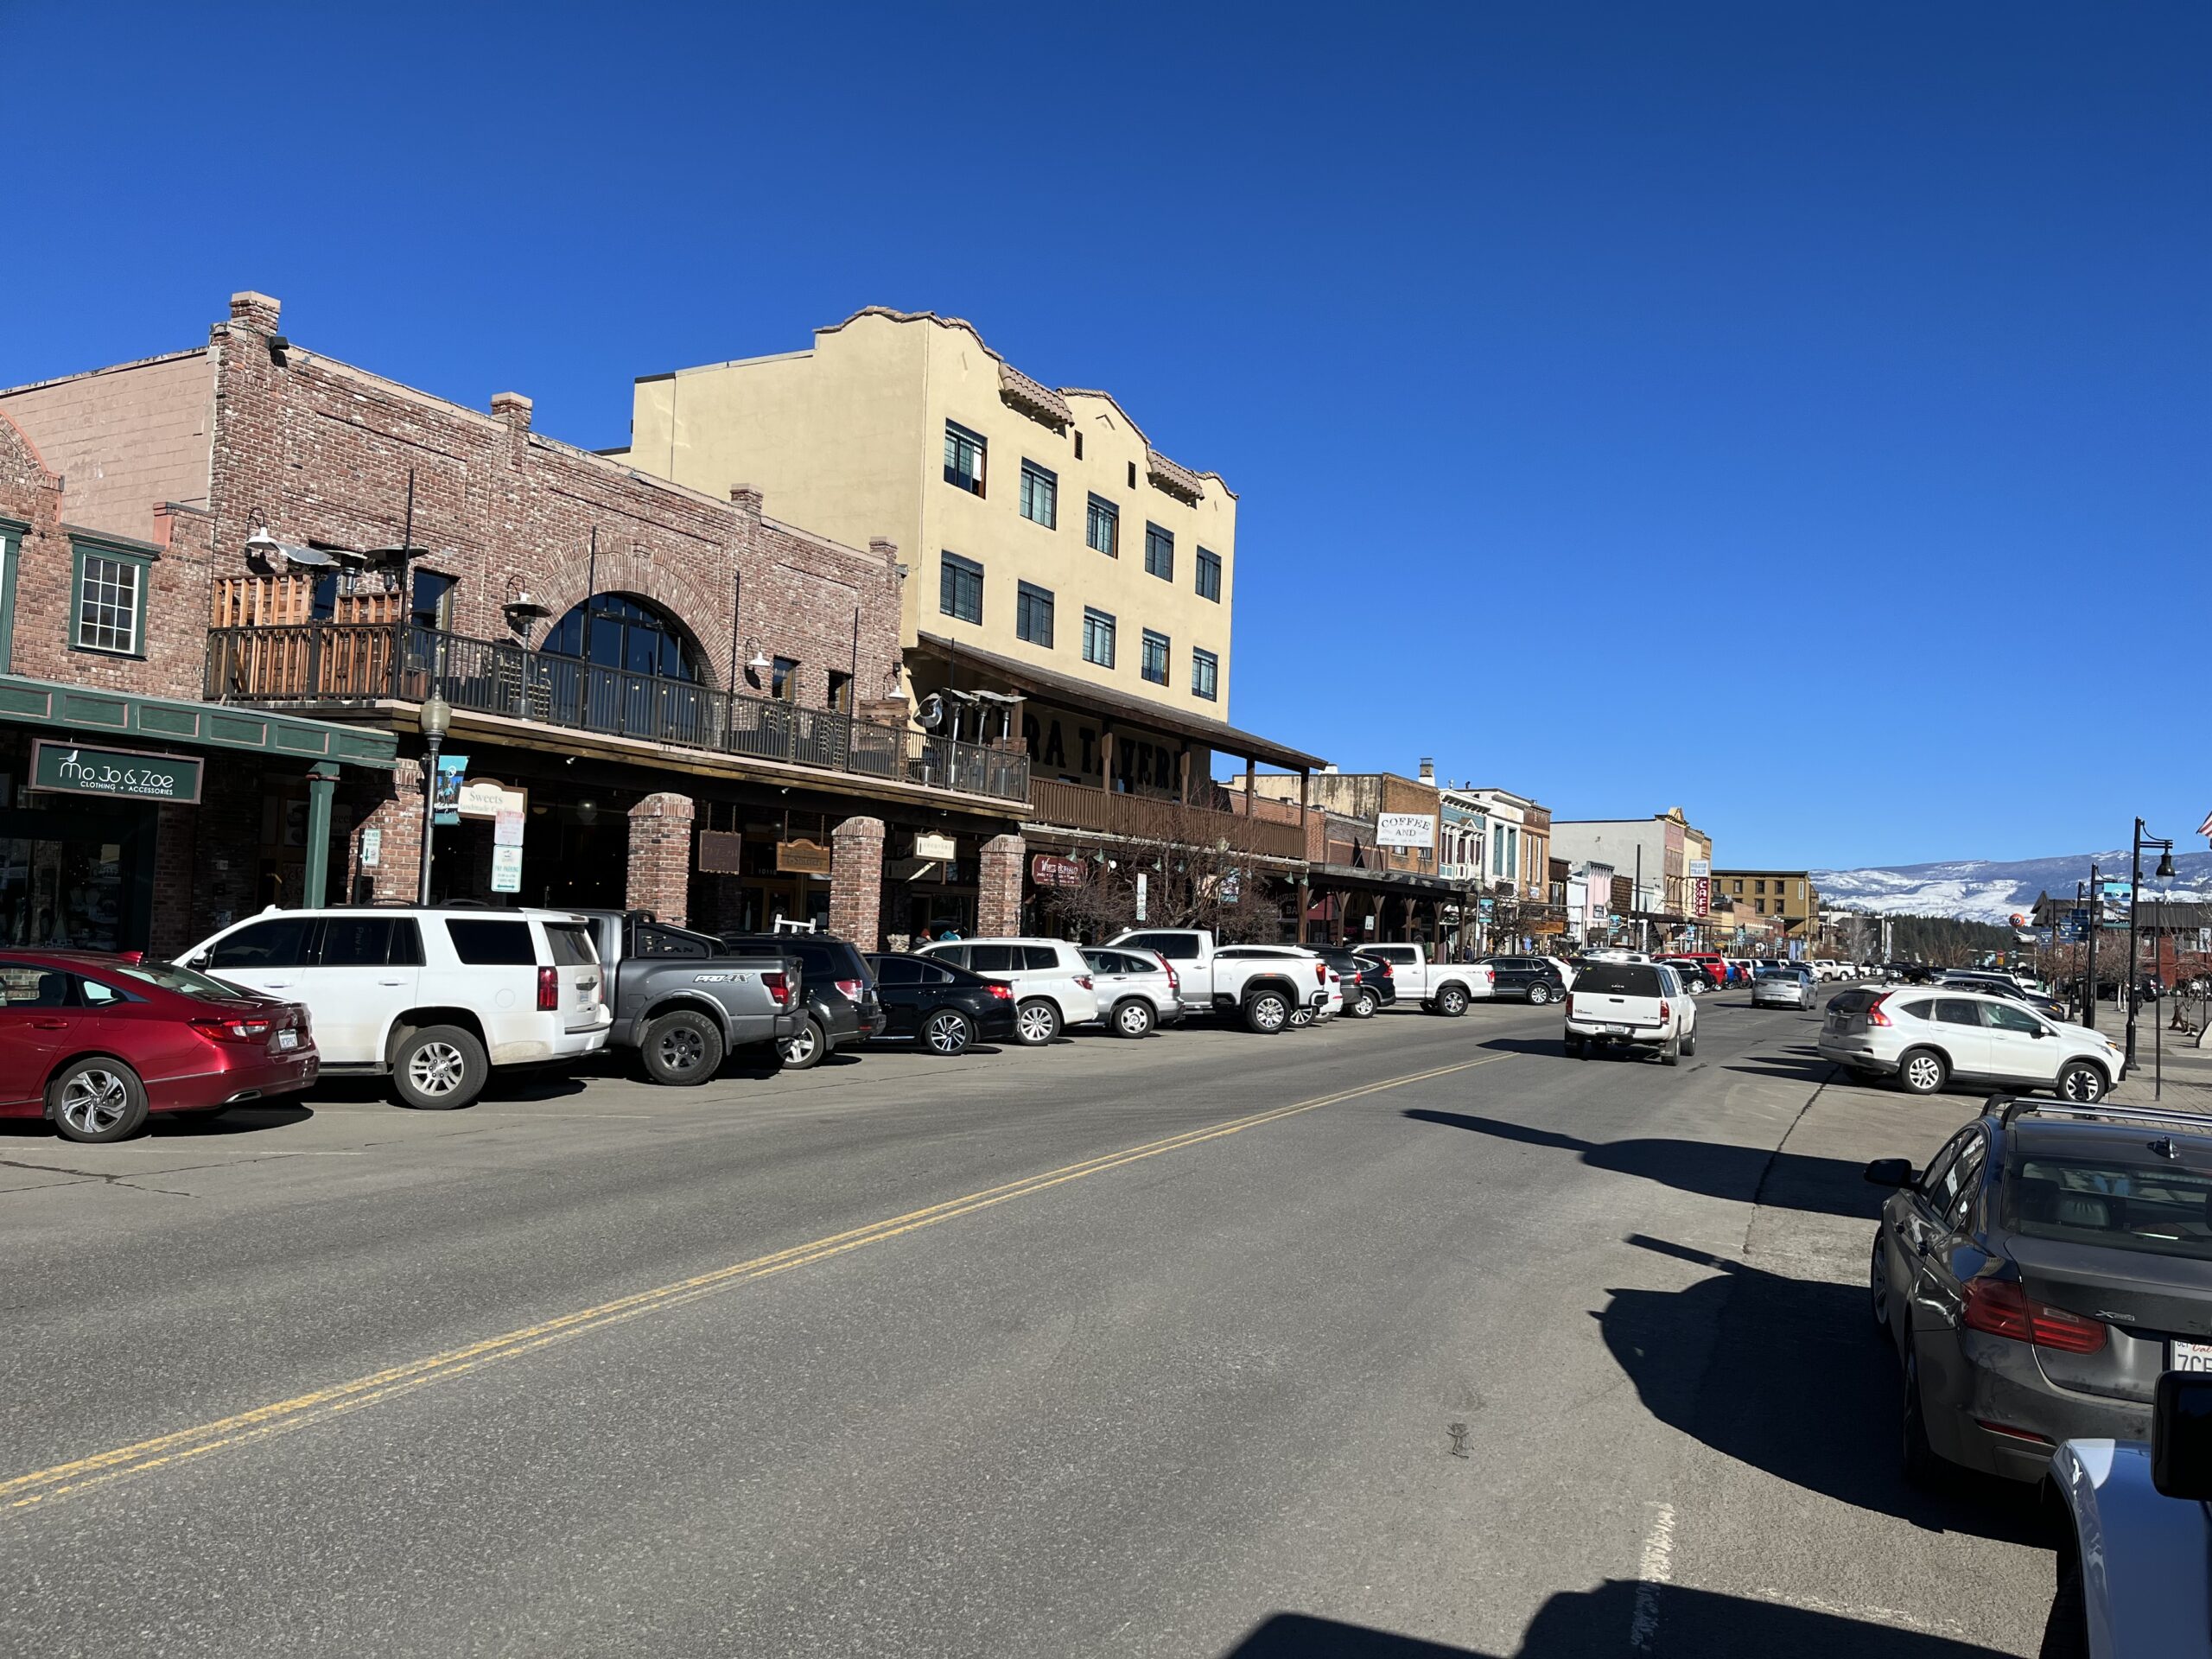 Downtown Truckee is made up of buildings from the 19th century. It's a worthwhile town to visit on an northern California road trip.